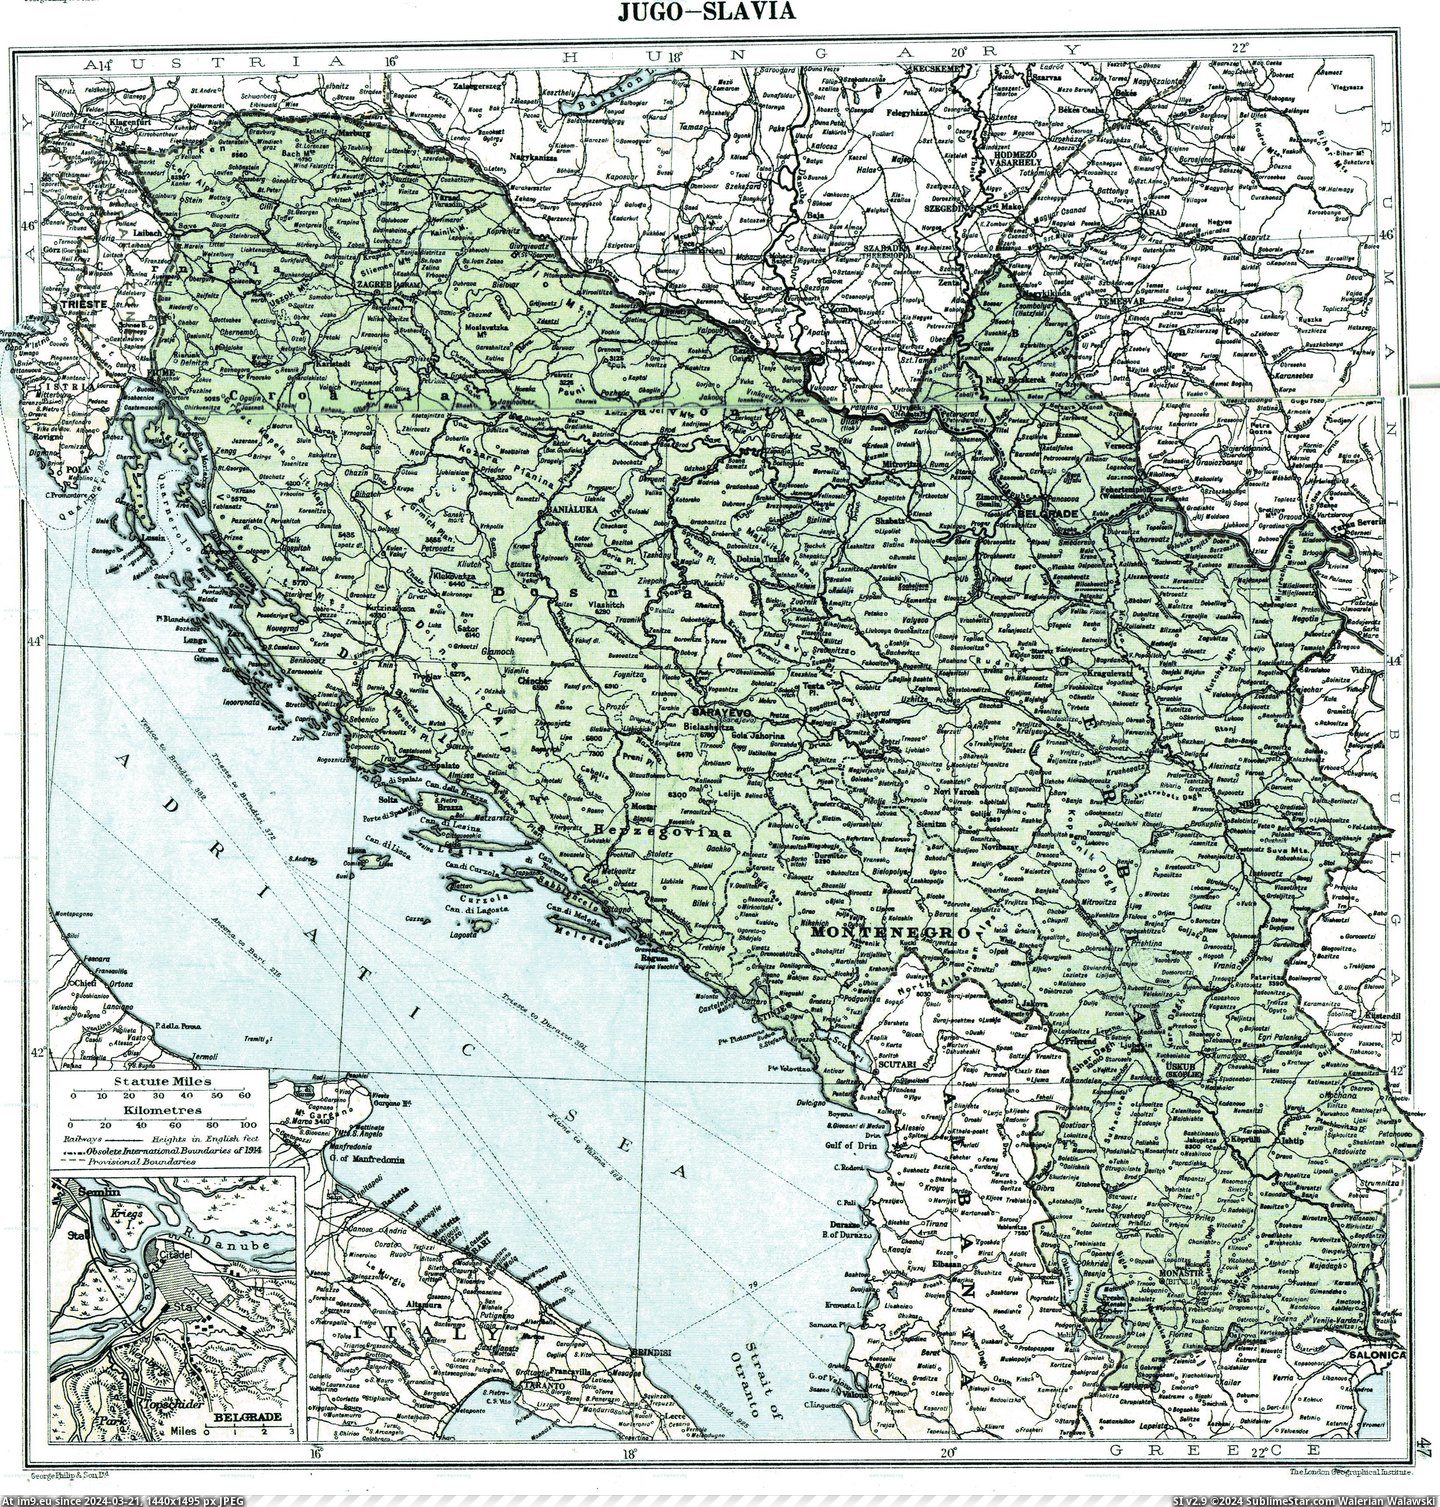 #Map #Kingdom #Yugoslavia #Early [Mapporn] Early map of Kingdom of Serbs, Croats and Slovenes (Yugoslavia) [3286x3424] Pic. (Image of album My r/MAPS favs))